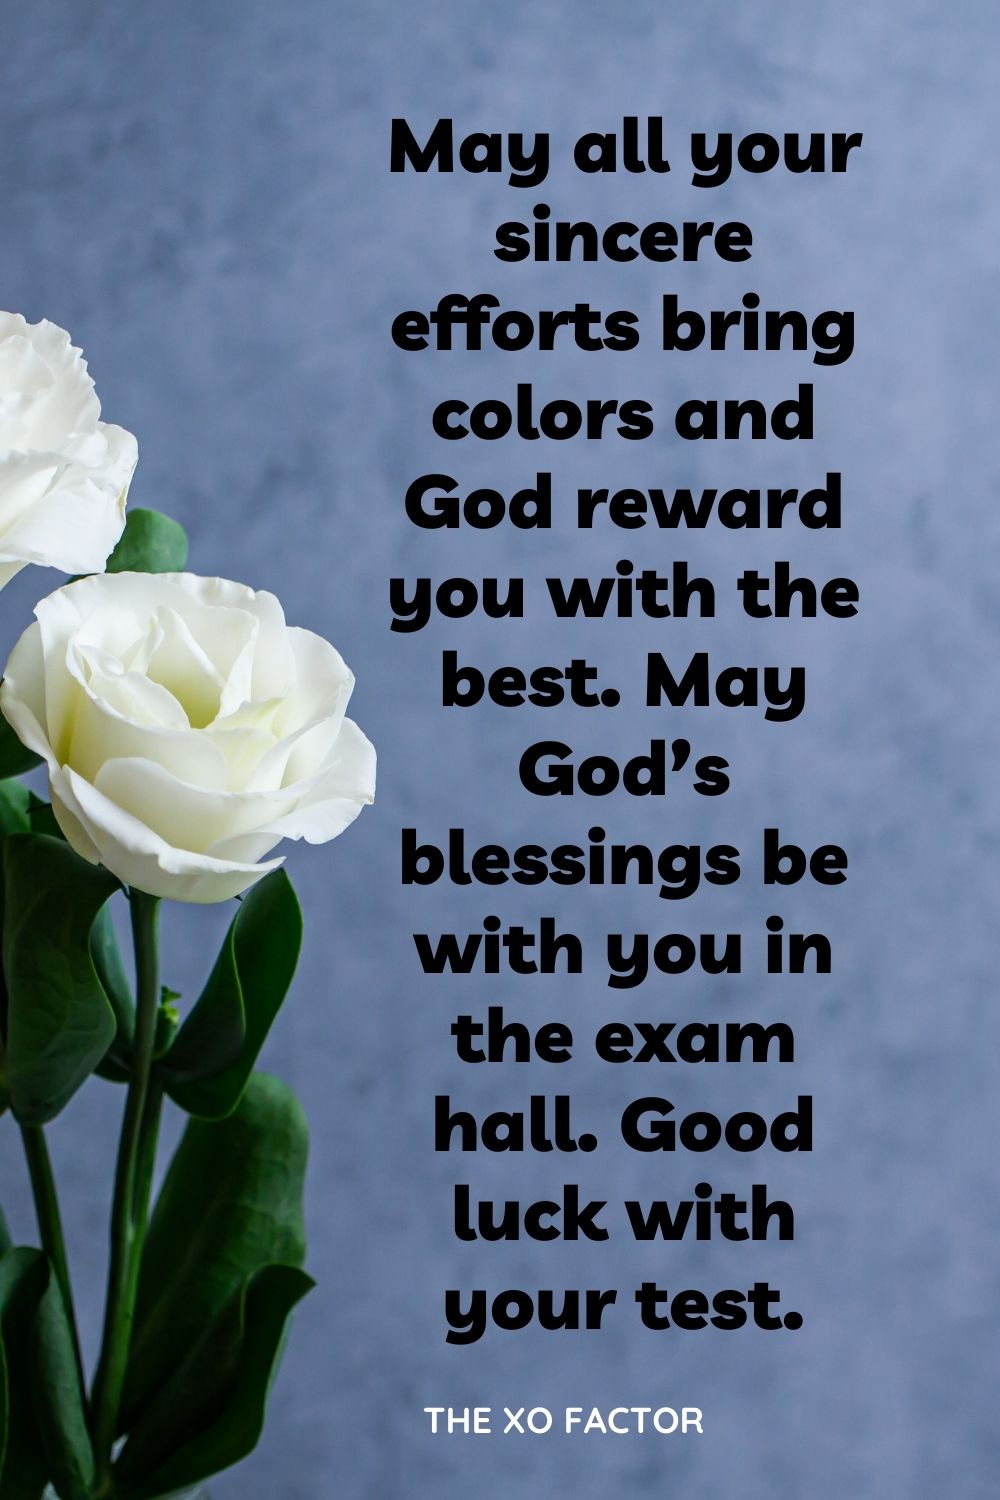 May all your sincere efforts bring colors and God reward you with the best. May God’s blessings be with you in the exam hall. Good luck with your test.